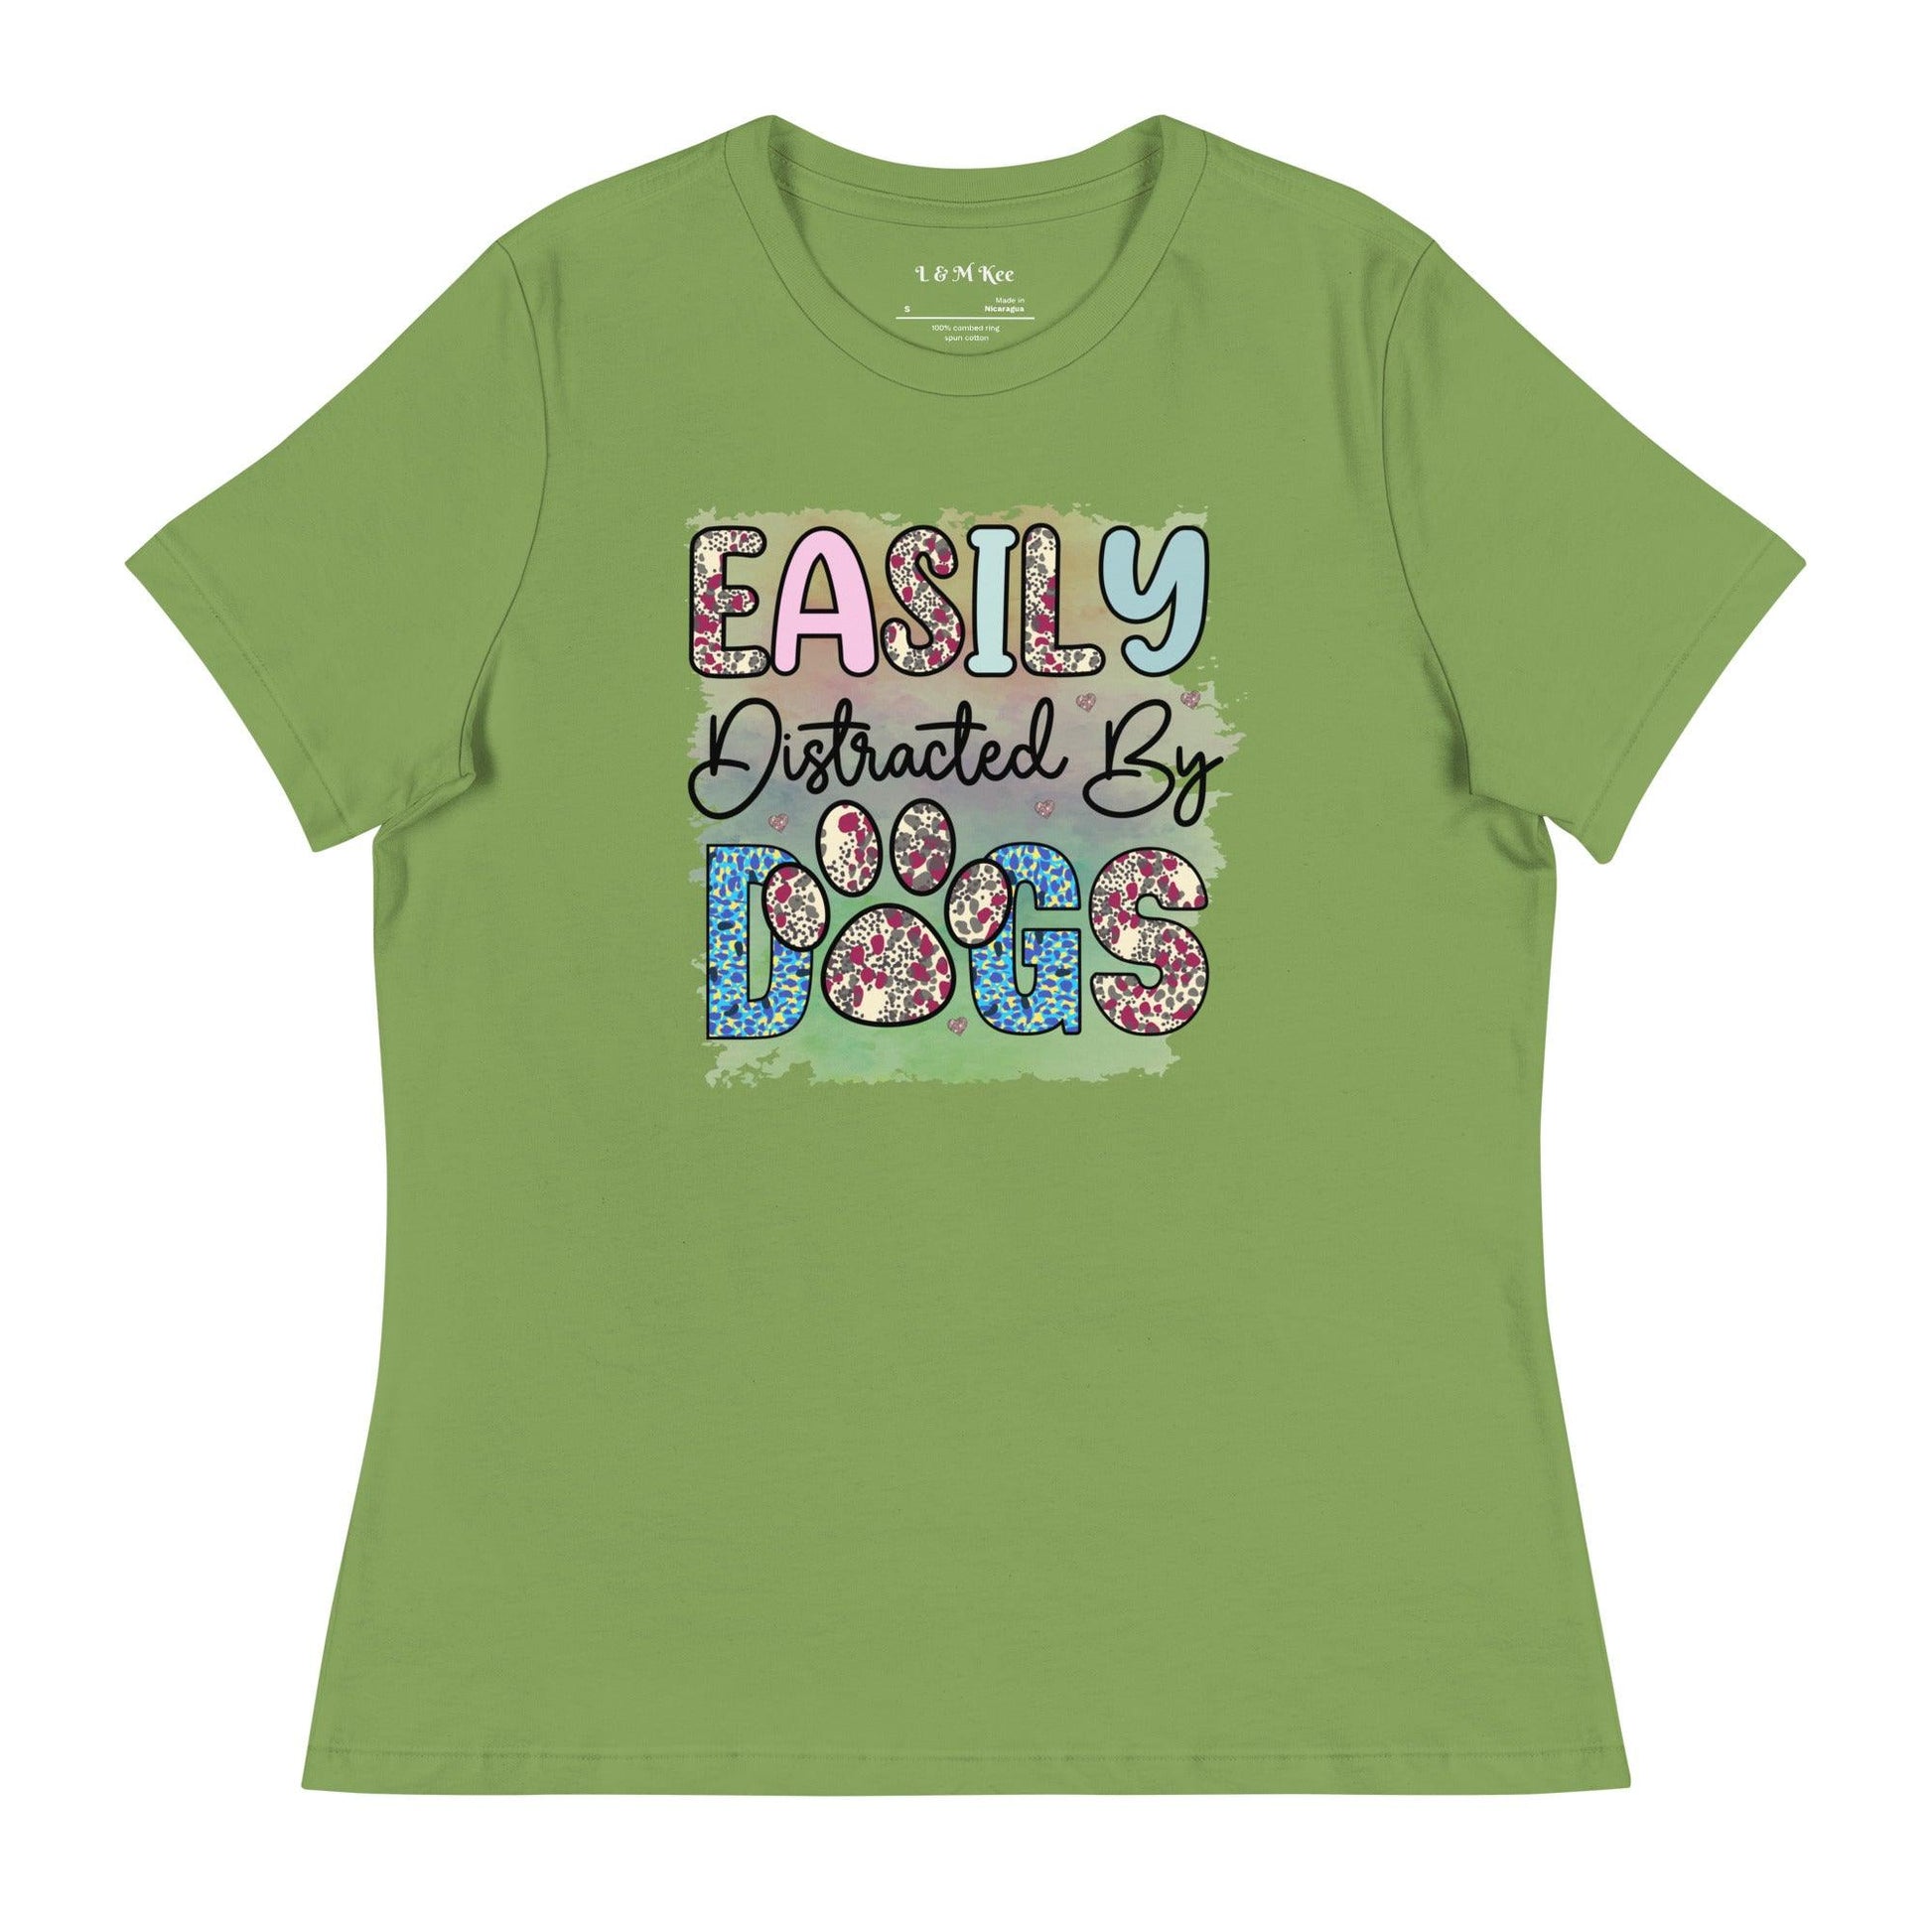 Easily Distracted by Dogs T-Shirt - L & M Kee, LLC